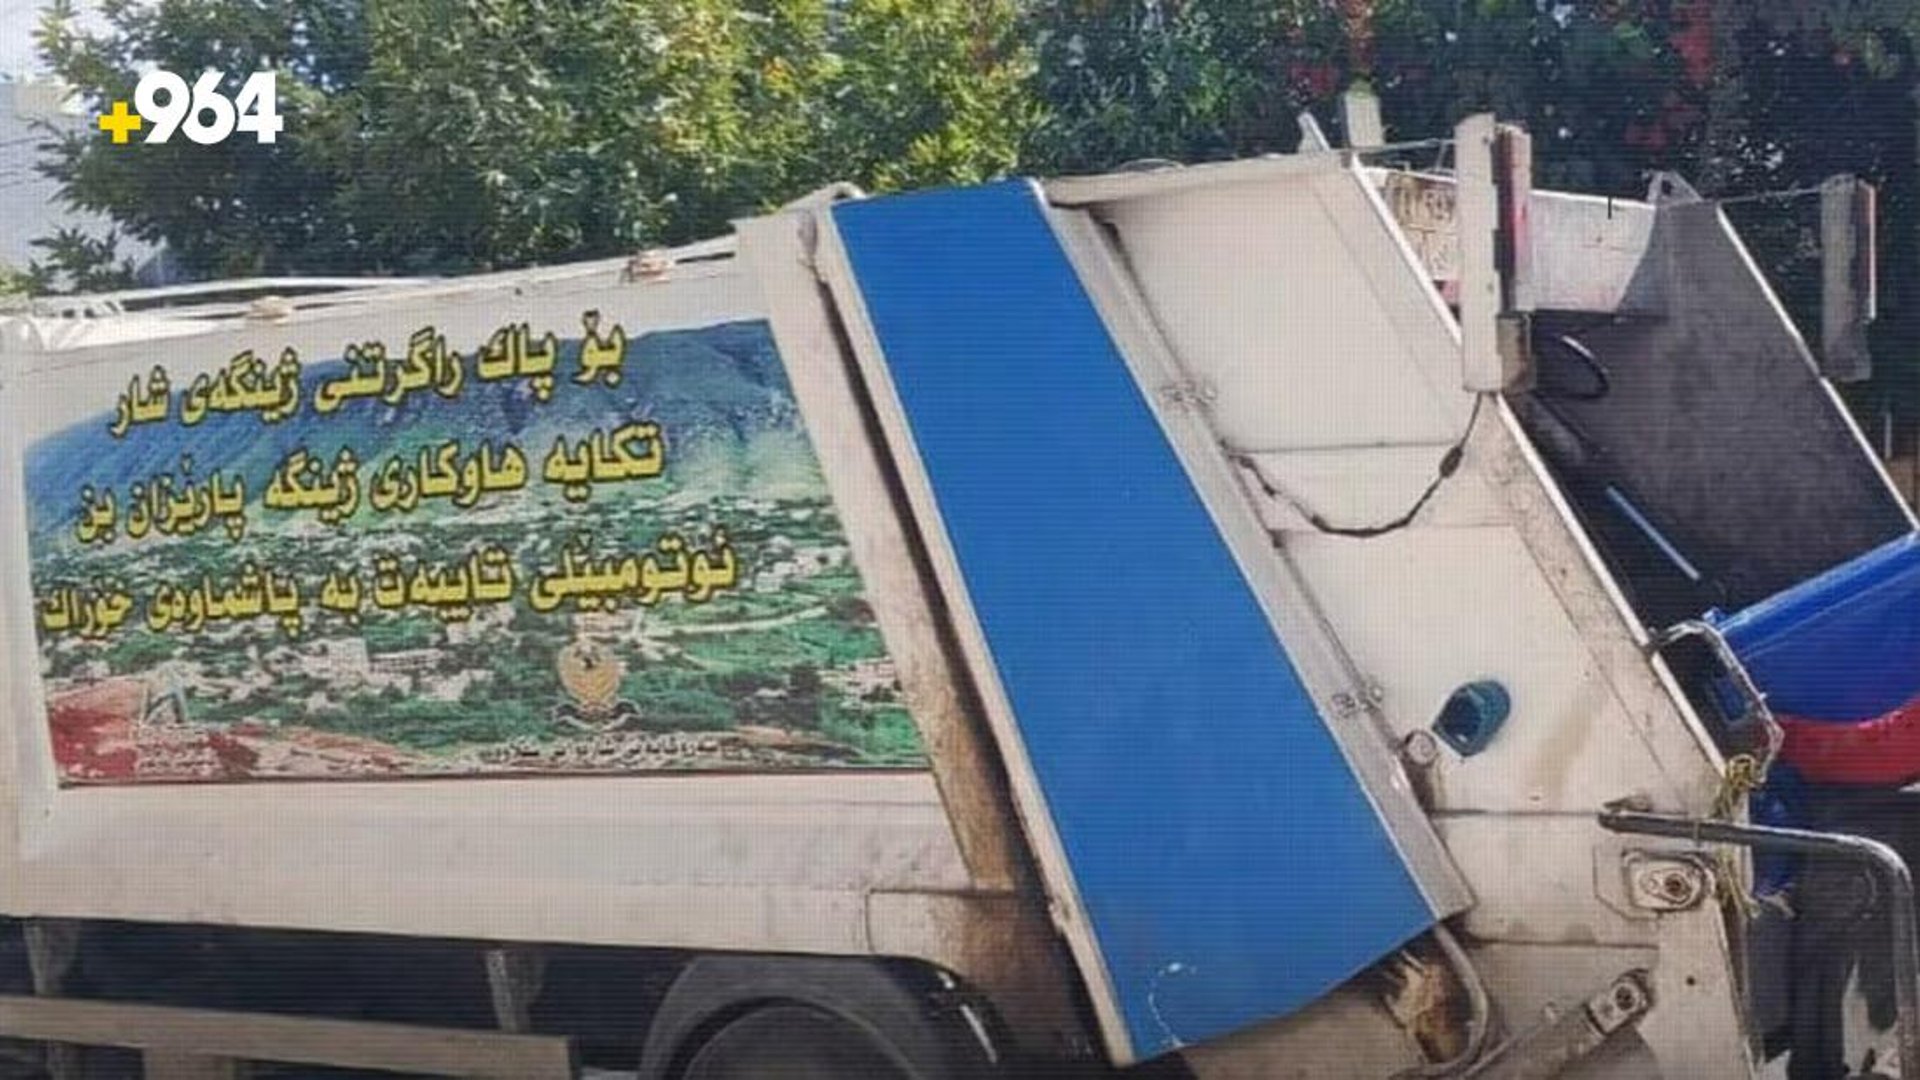 Shaqlawa municipality sorts food waste to feed animals and considers recycling plant